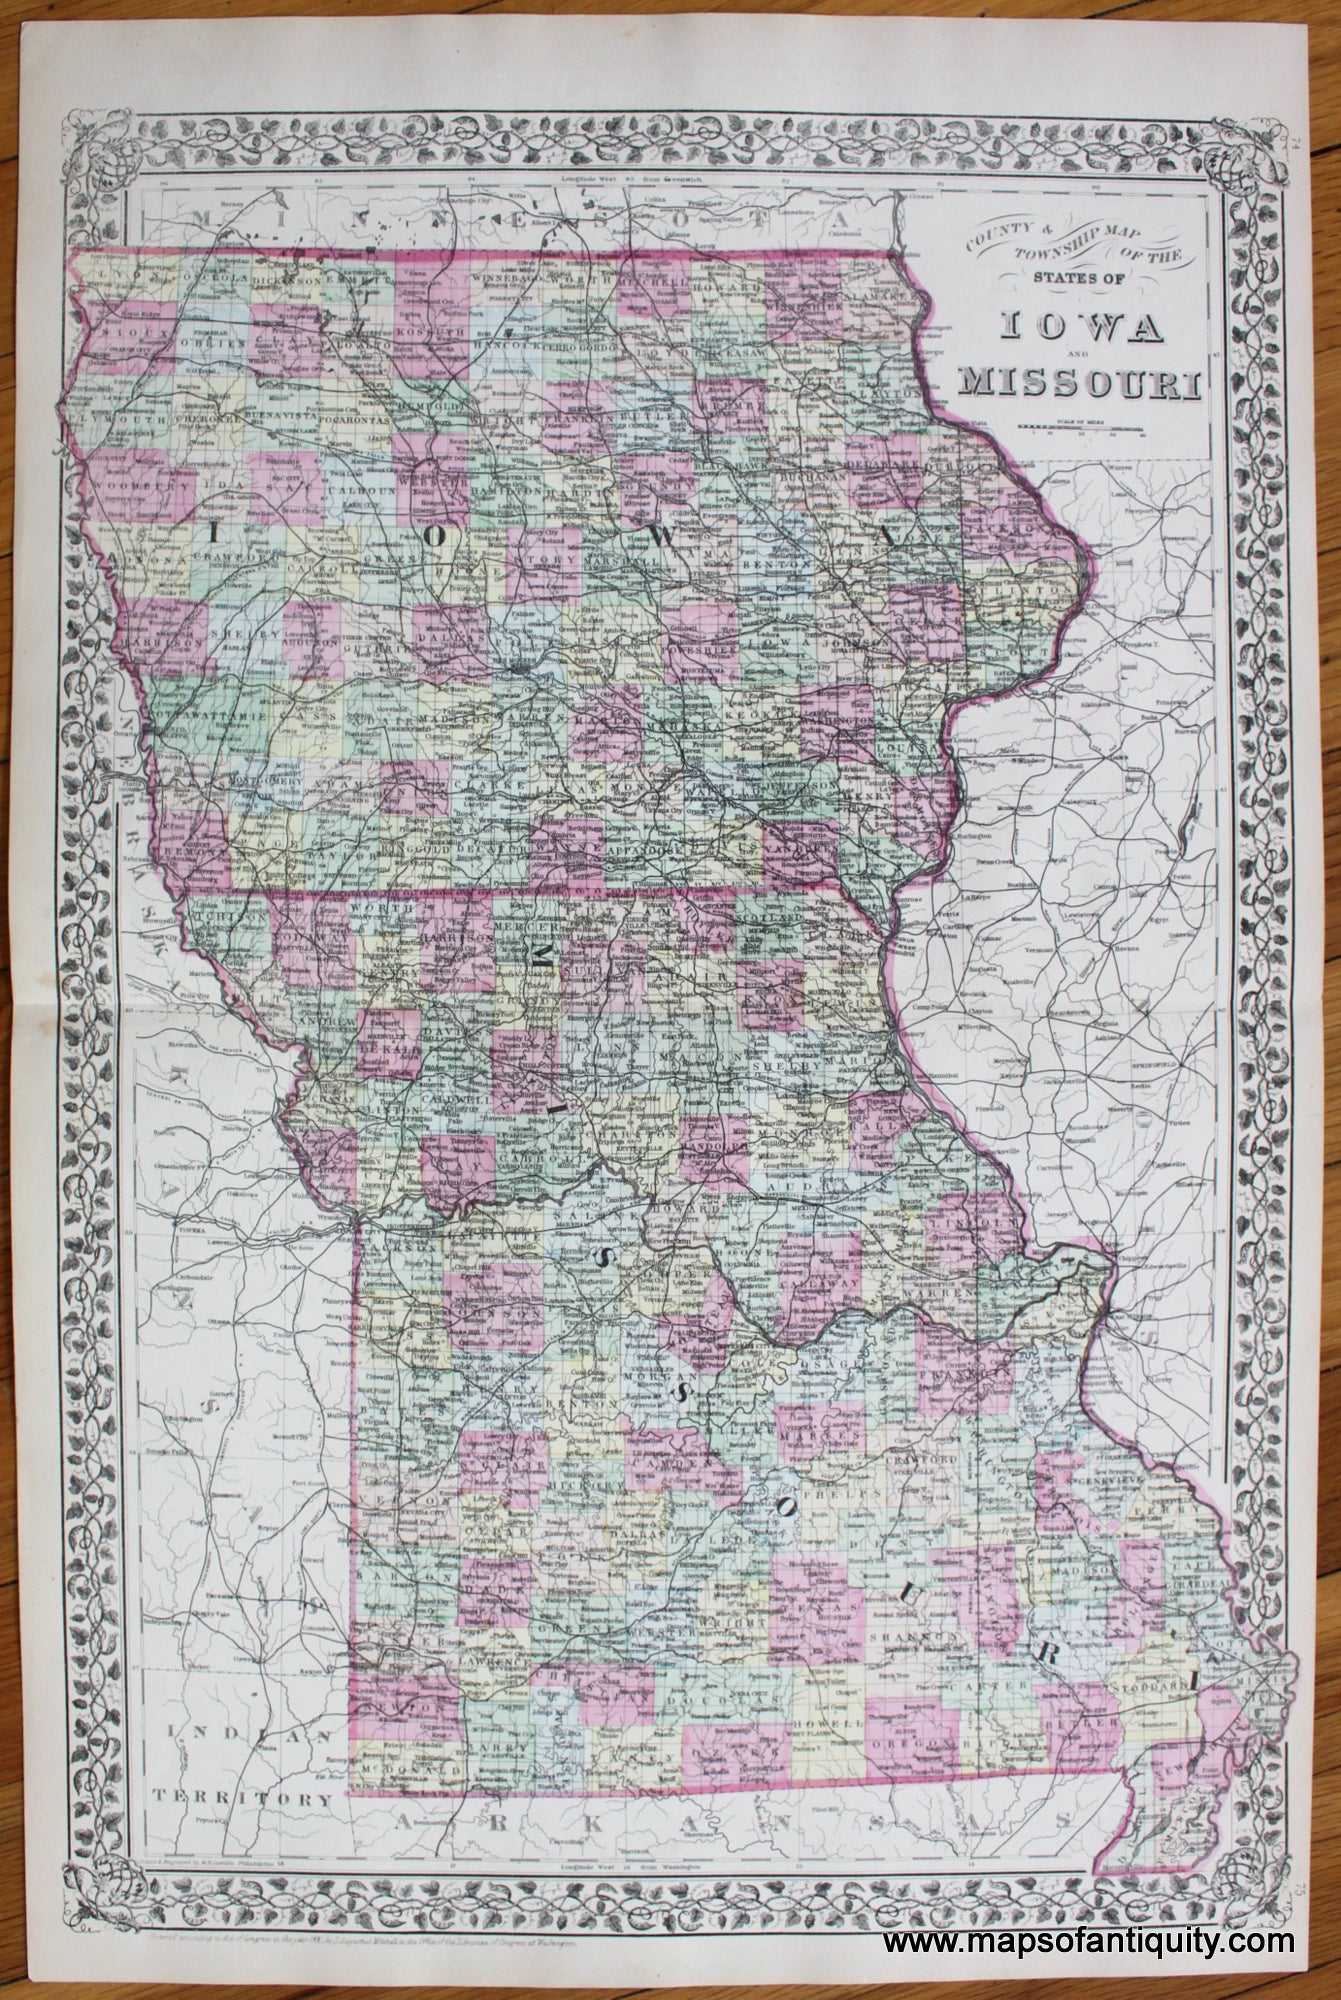 Antique-Hand-Colored-Map-Map-of-the-States-of-Iowa-and-Missouri---Map-of-St.-Louis-on-reverse.--United-States-Midwest-1884-Mitchell-Maps-Of-Antiquity